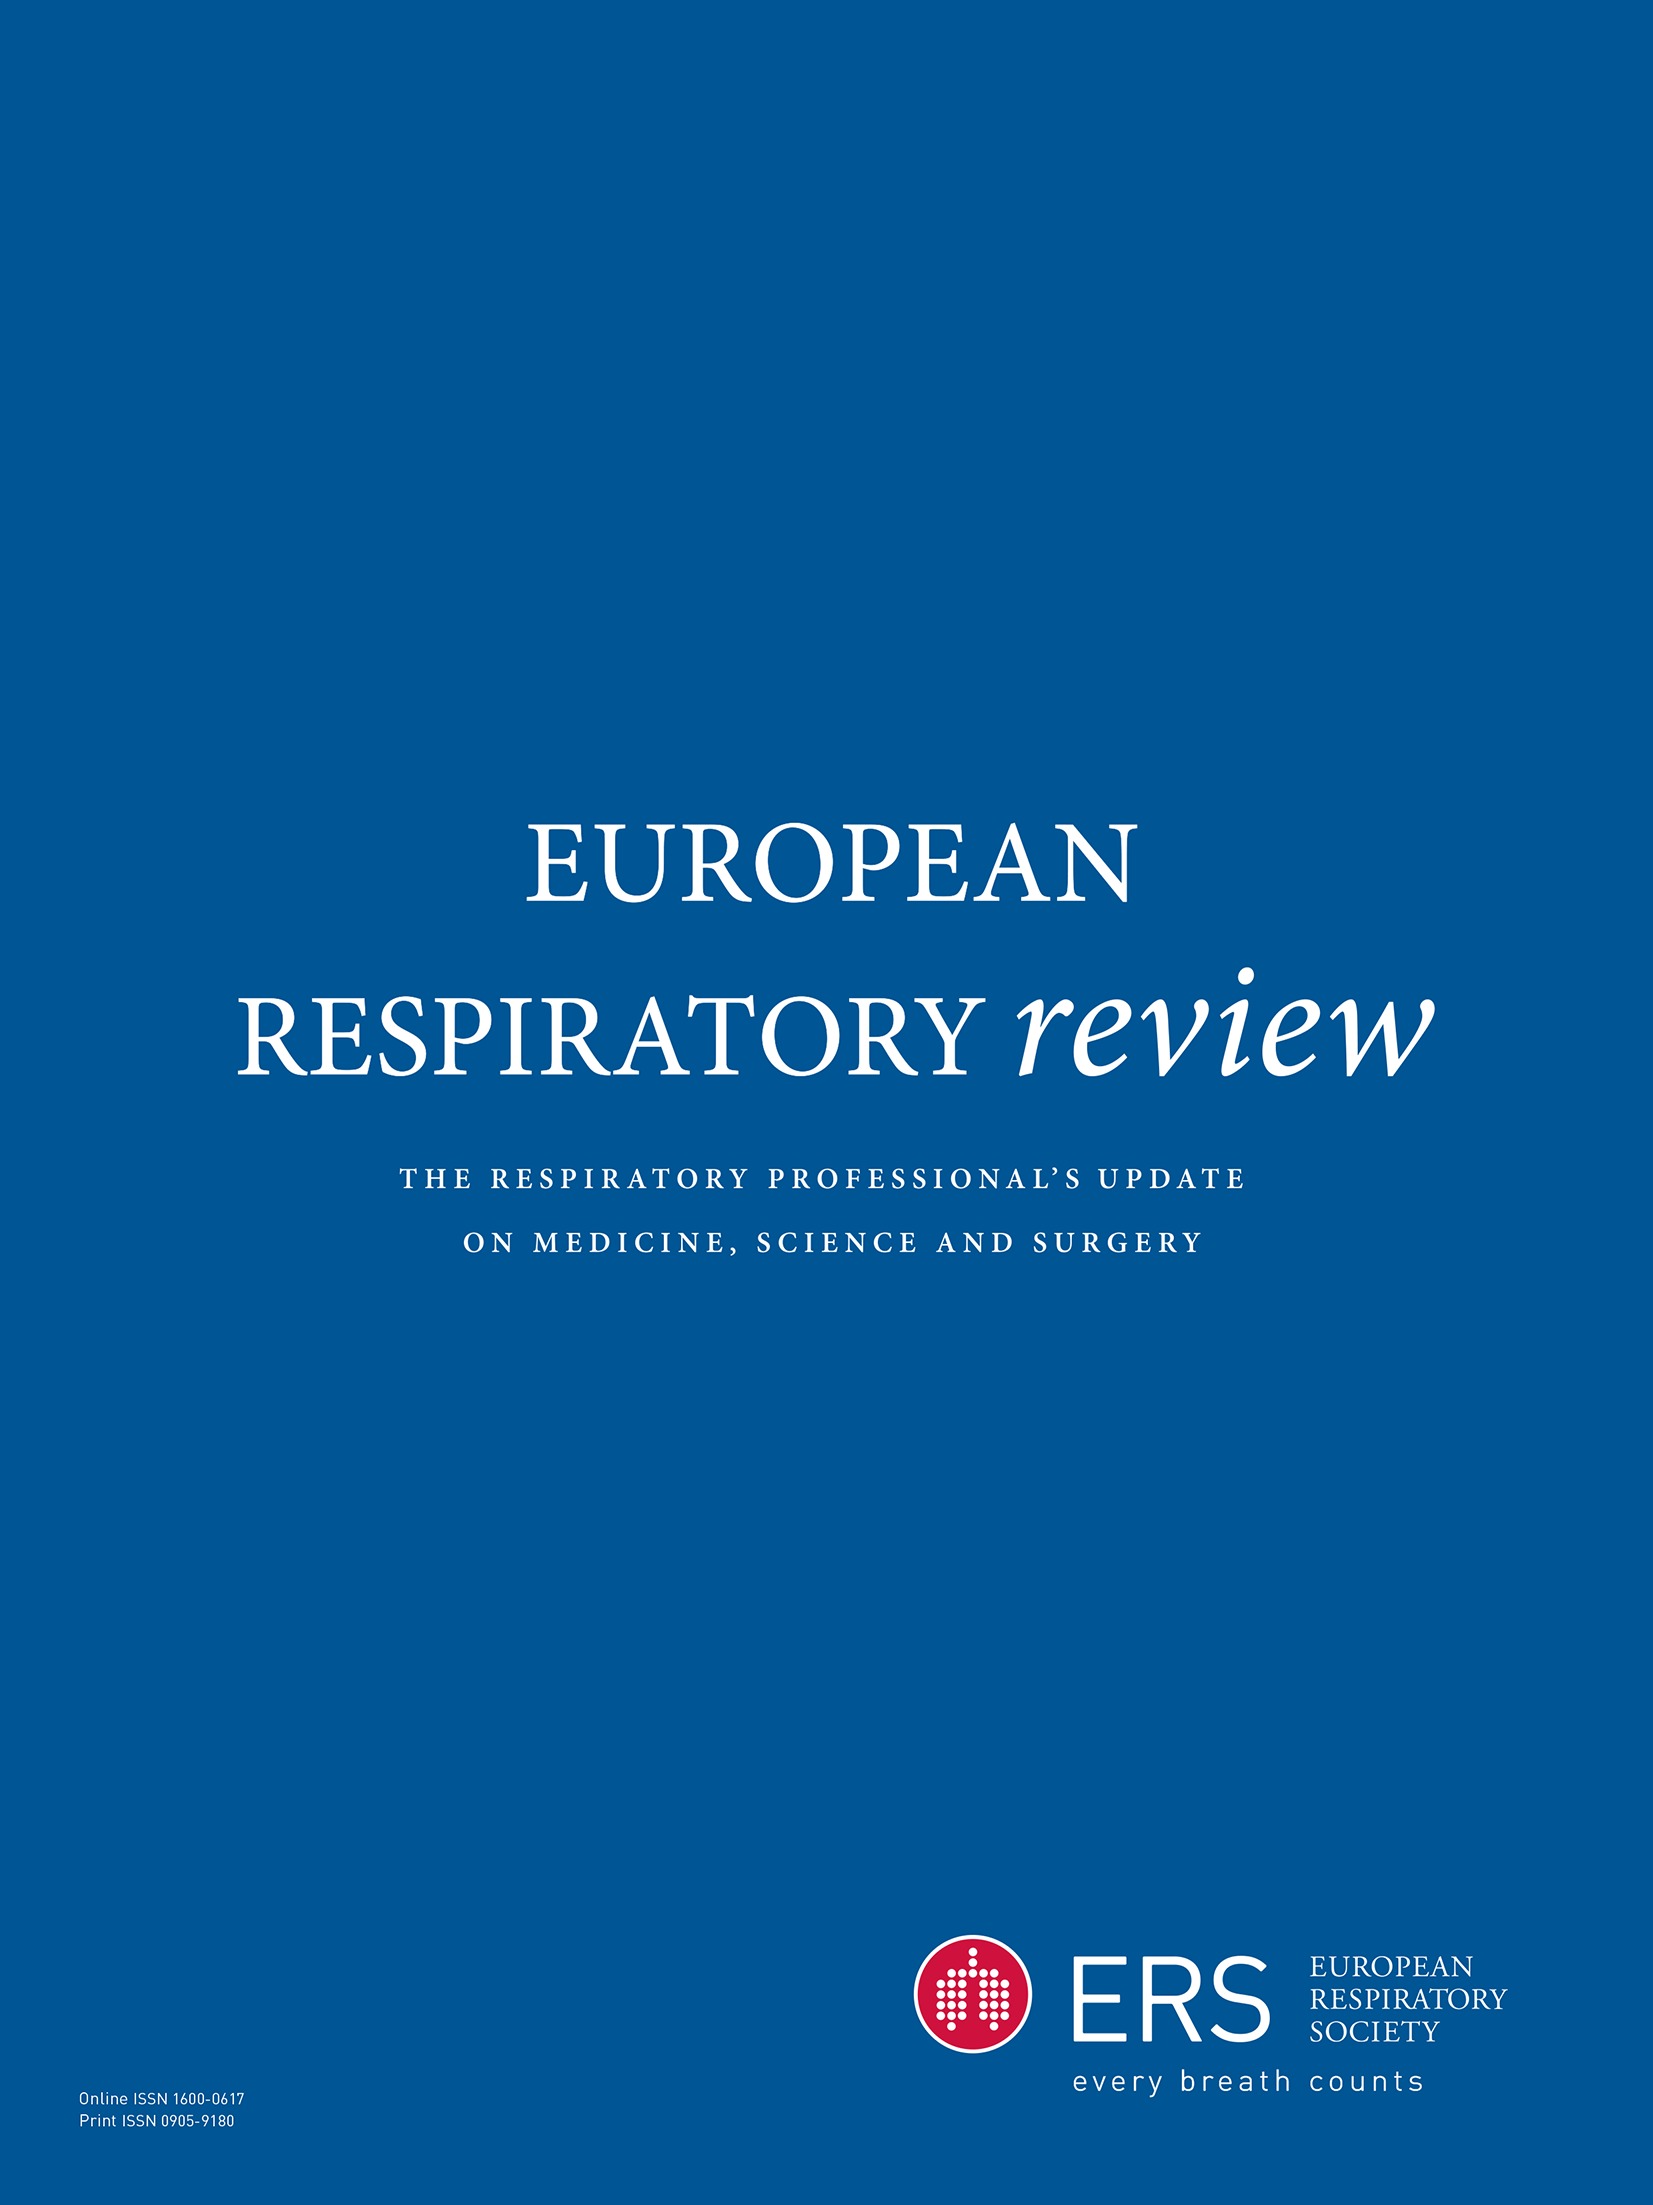 The re-emerging role of linoleic acid in paediatric asthma